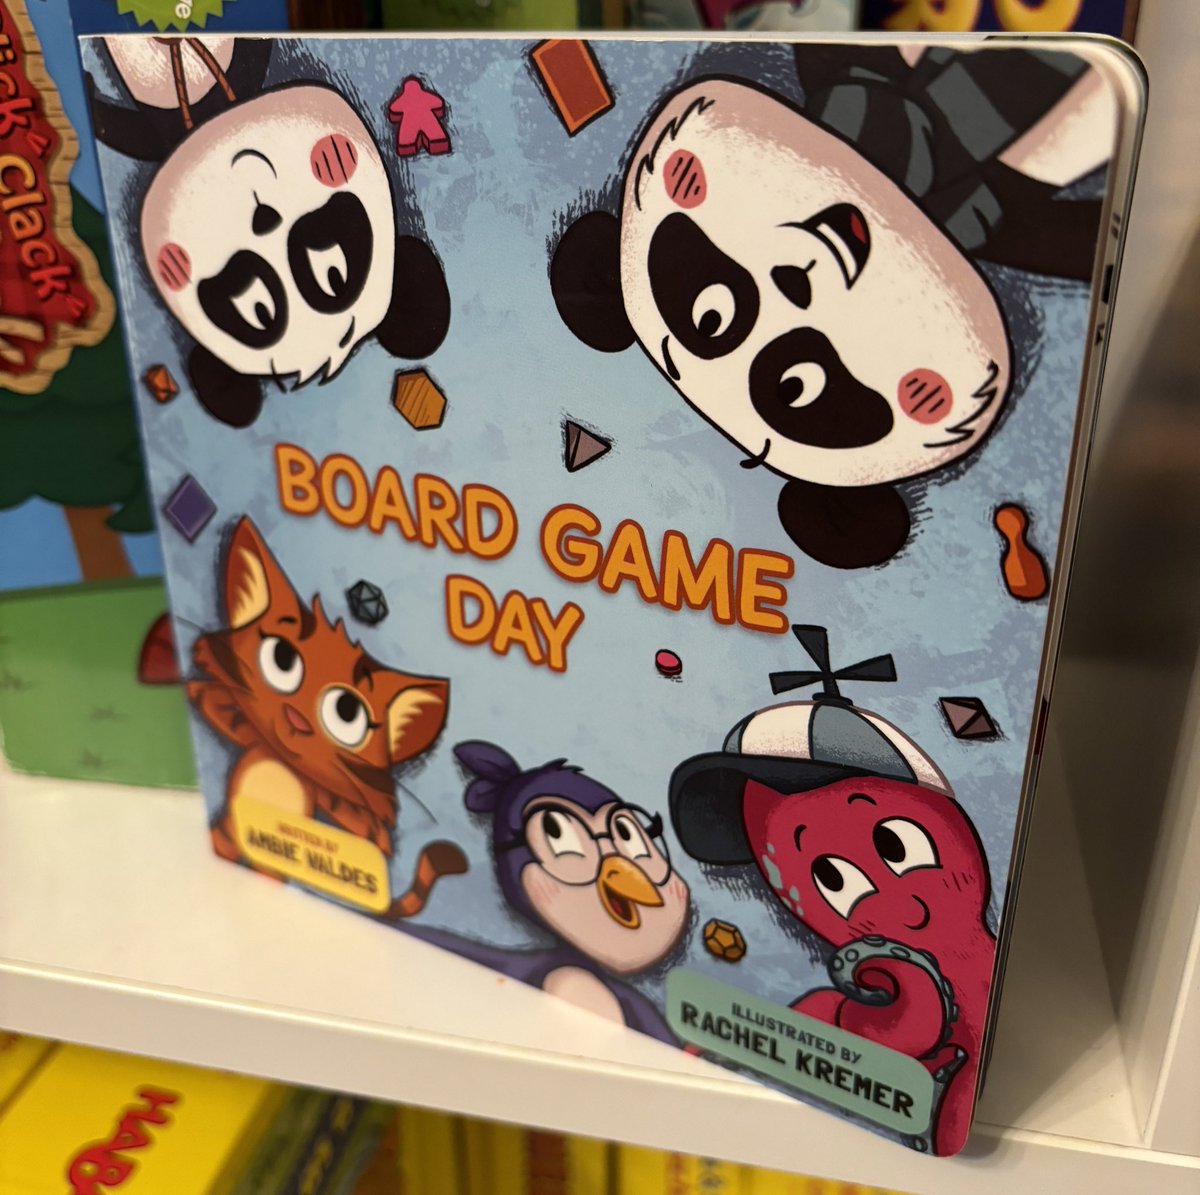 If you’re at Dice Tower West today, I’m not officially there yet (I have a weekend badge) but my book’s there in the vendor hall! Make sure to drop by the @IBCGames booth to get a copy of Board Game Day!